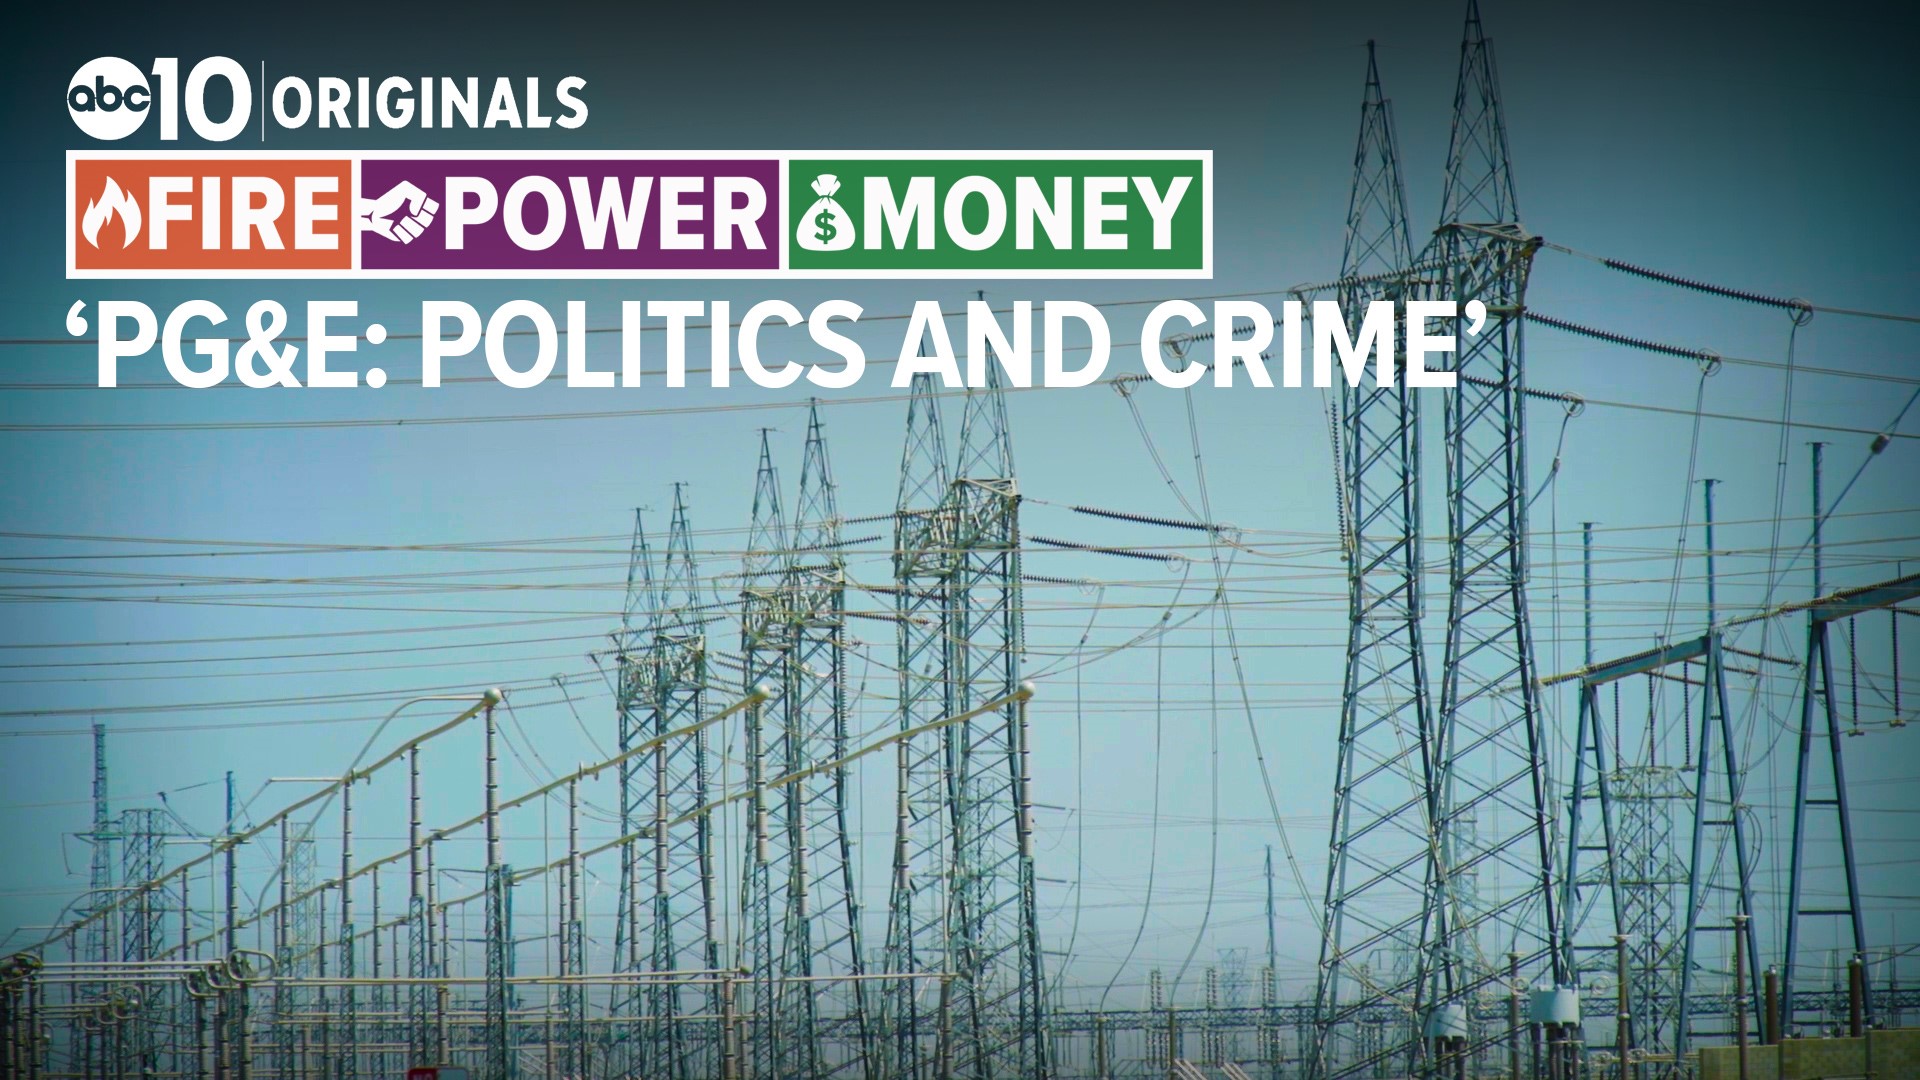 ABC10’s investigation found California politicians kept taking money from PG&E after the company pleaded guilty to 84 felony manslaughters.